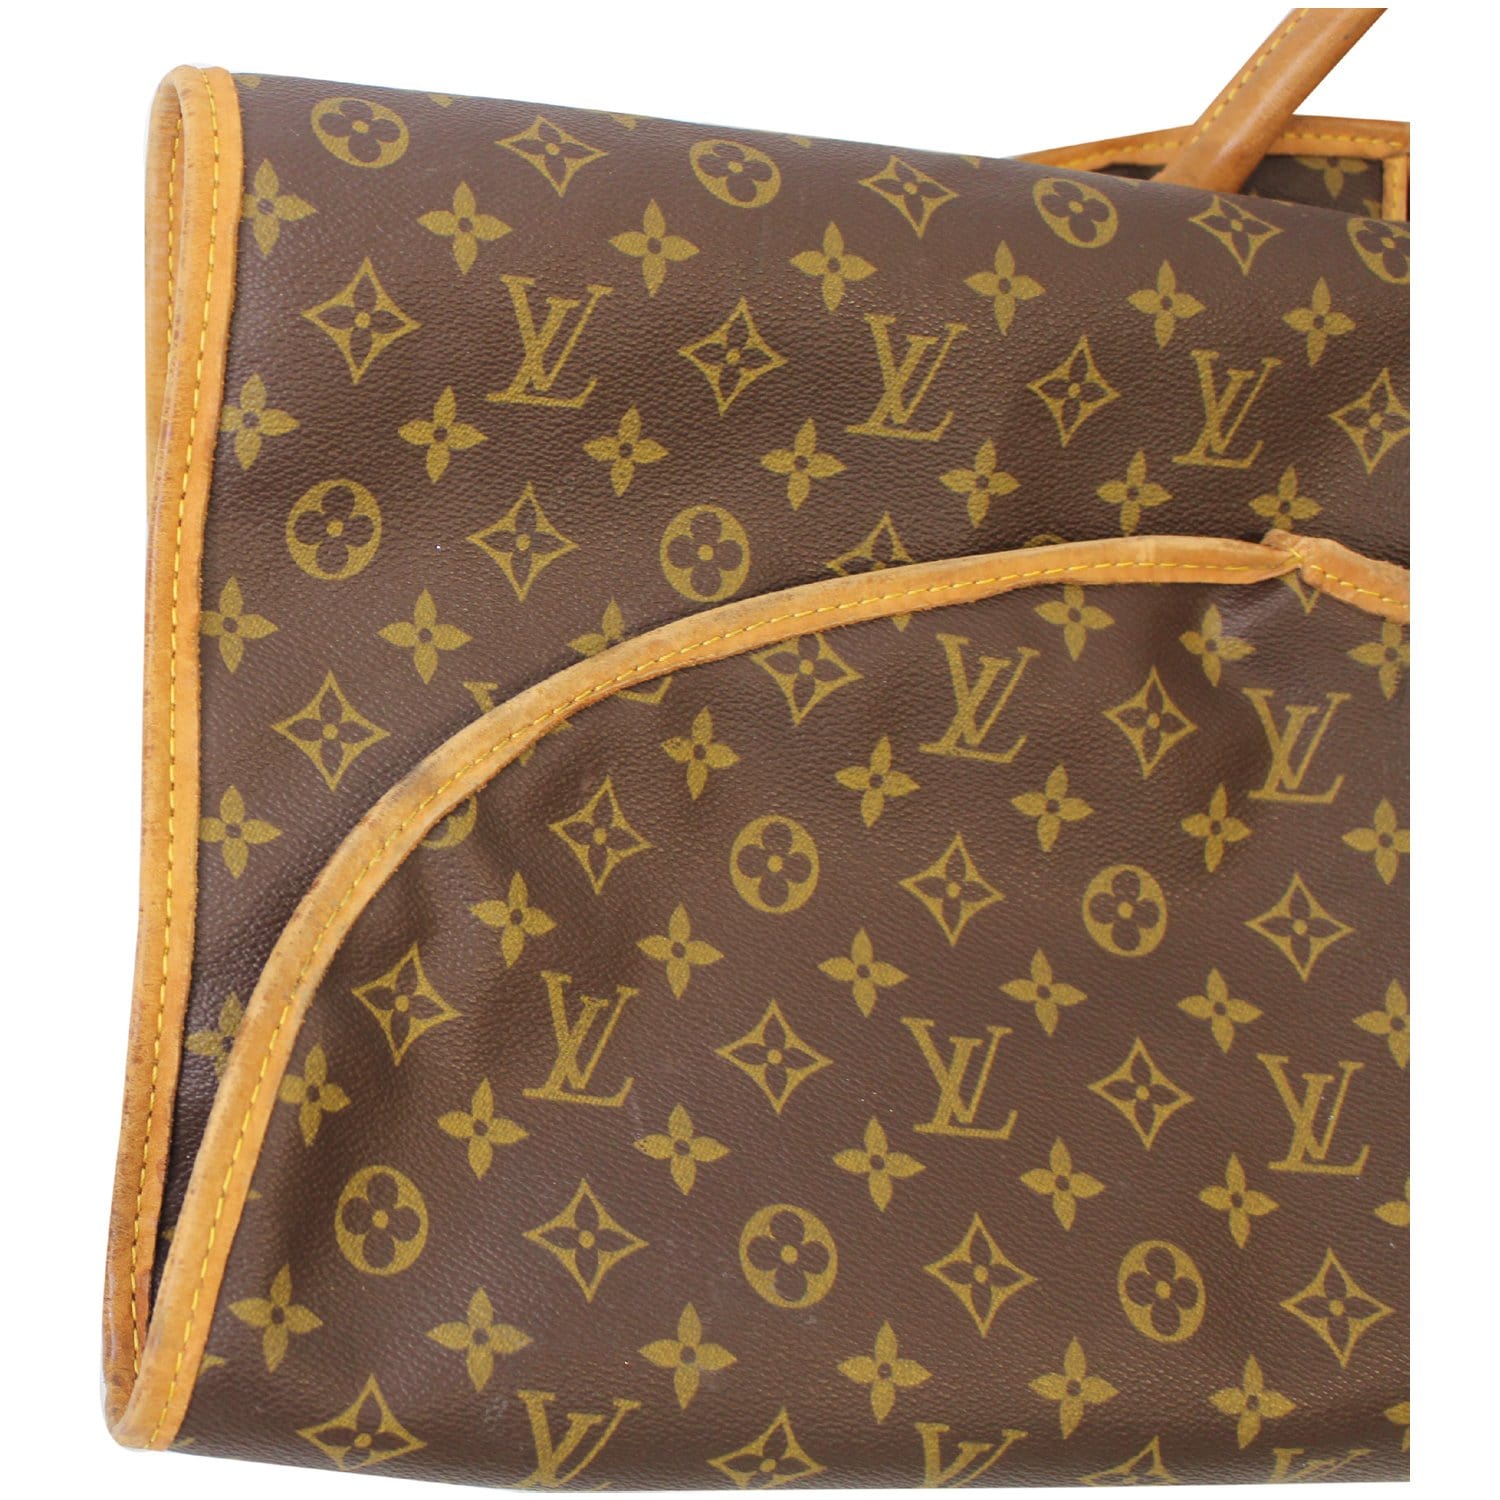 Louis Vuitton Garment Cover Kleber 872068 Monogram Sac Chasse with Strap  Bandouliere Brown Coated Canvas Weekend/Travel Bag, Louis Vuitton